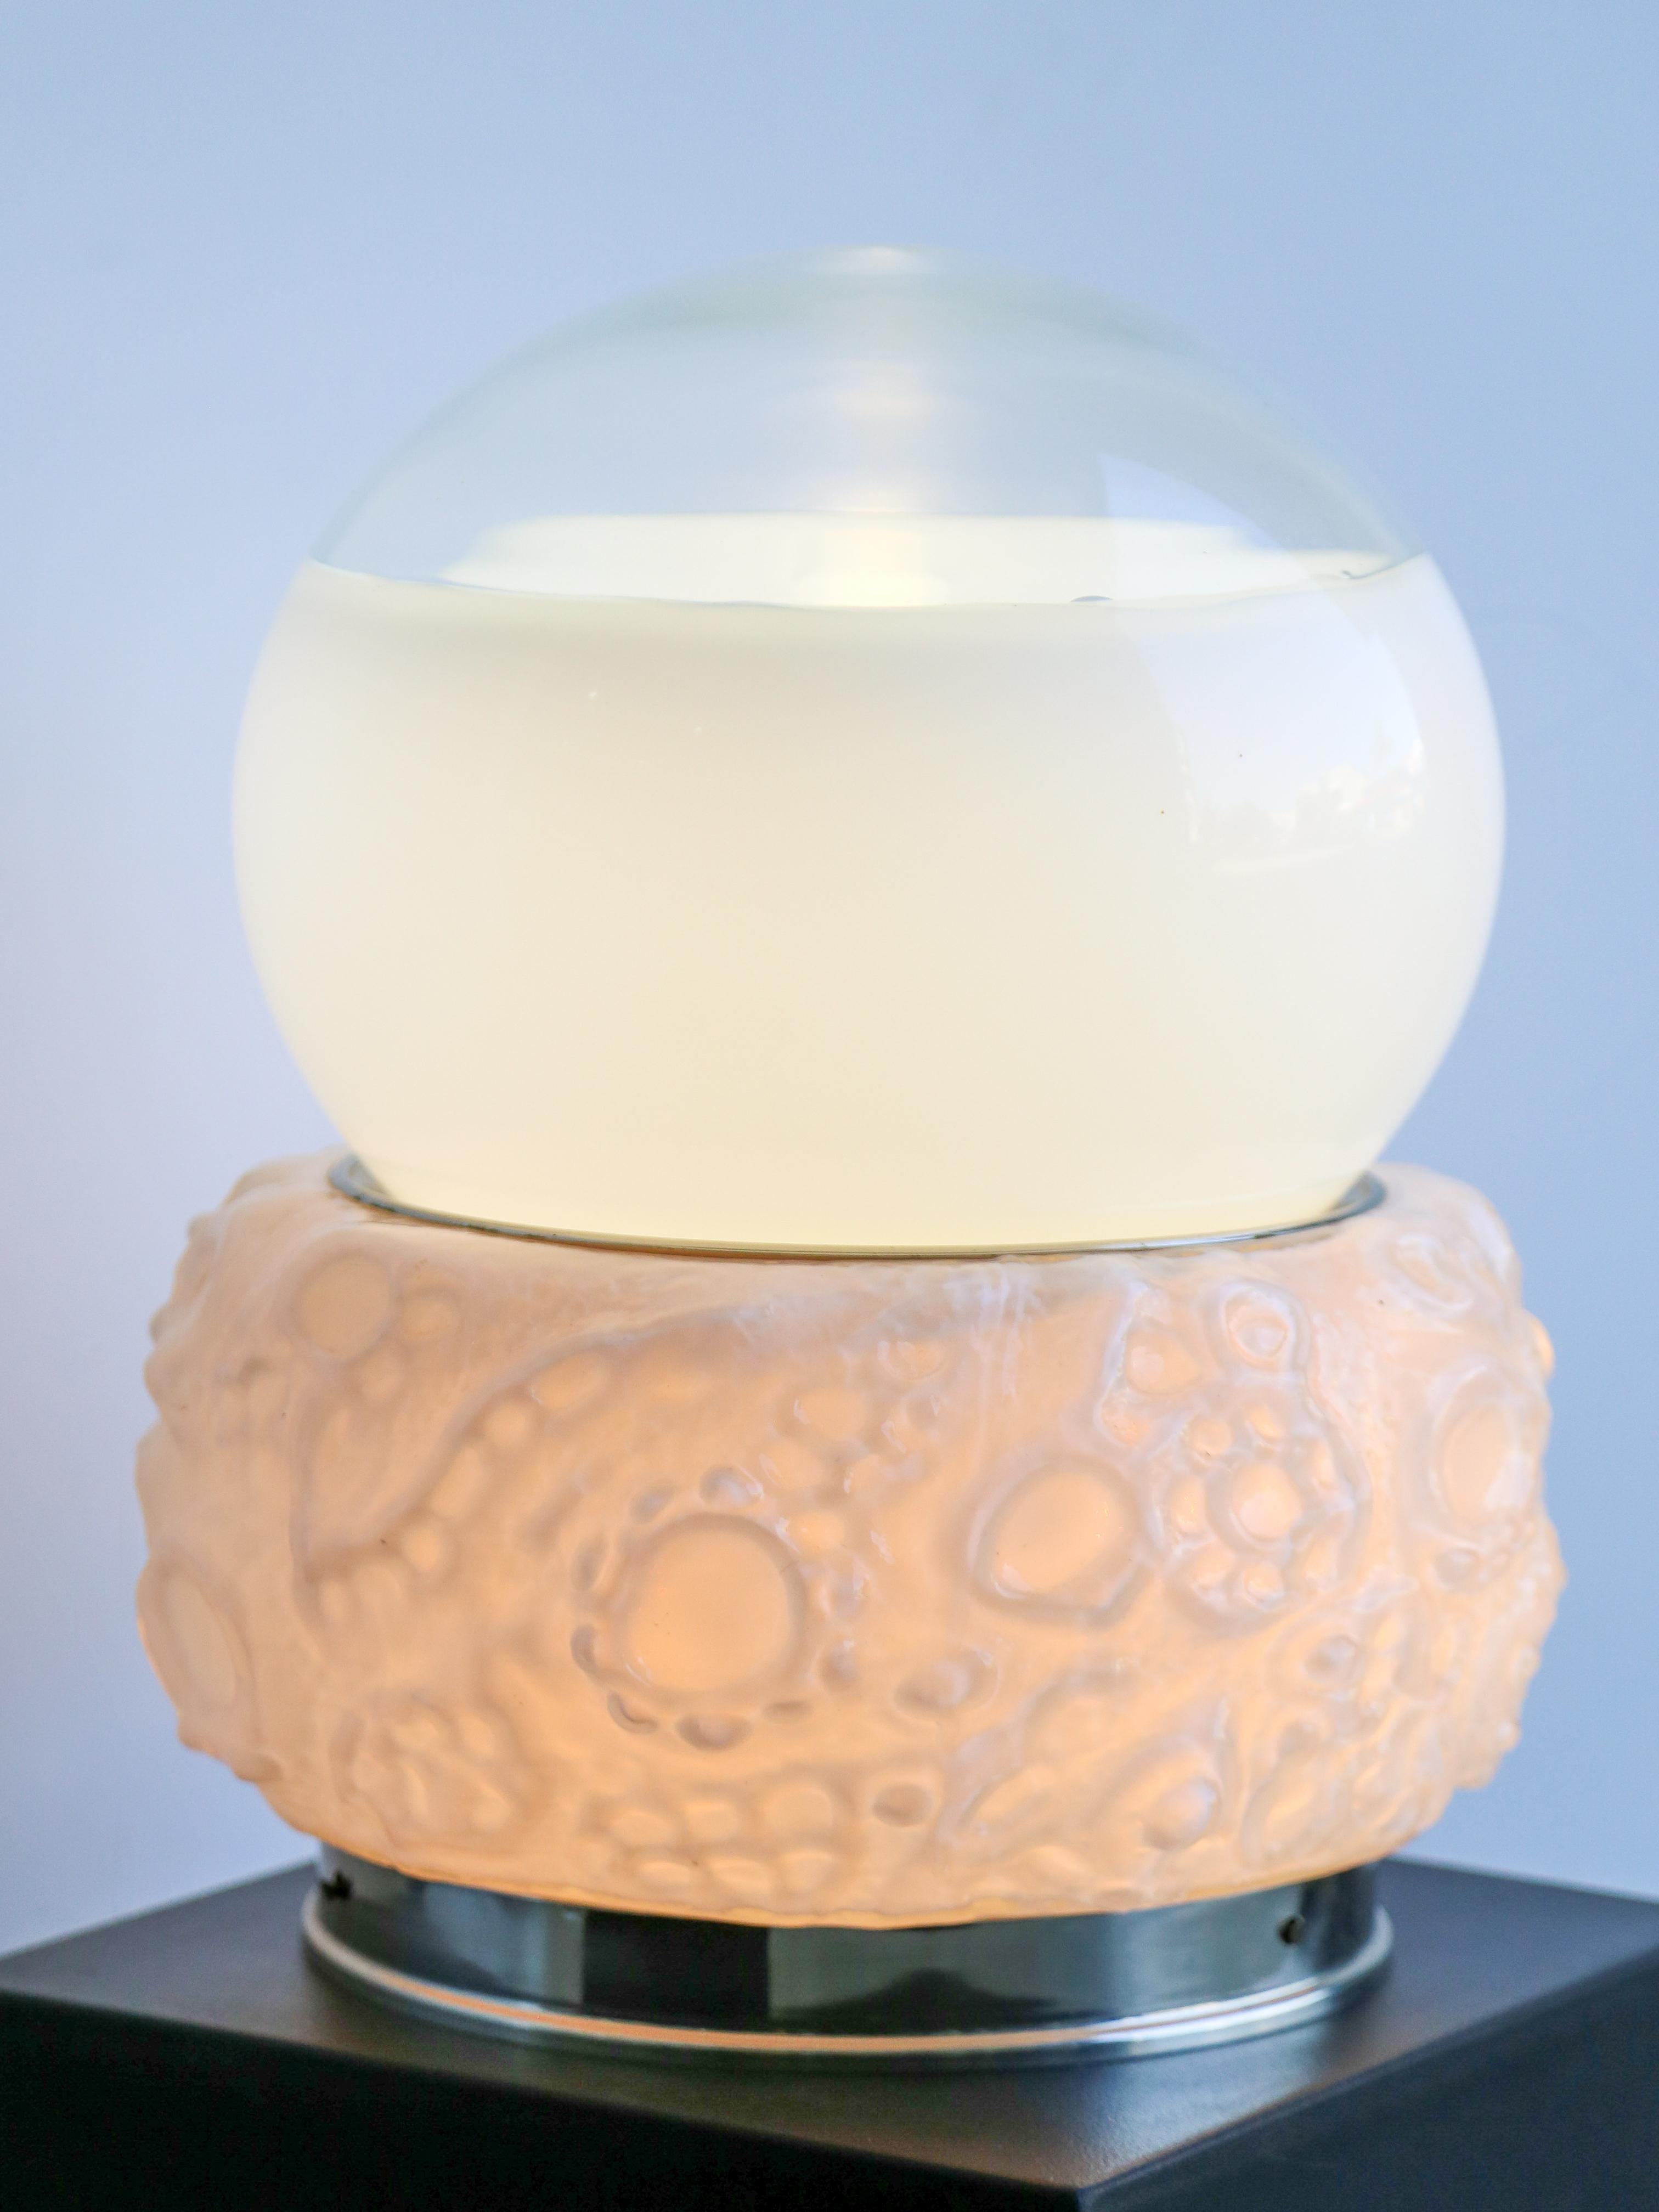 Osso ( bone ) table lamp by Mazzega.

Mazzega is an Italian glass company known for its beautiful and artistic glasswork, particularly in the field of Murano glass. Murano glass is a renowned type of glass that originates from the island of Murano,